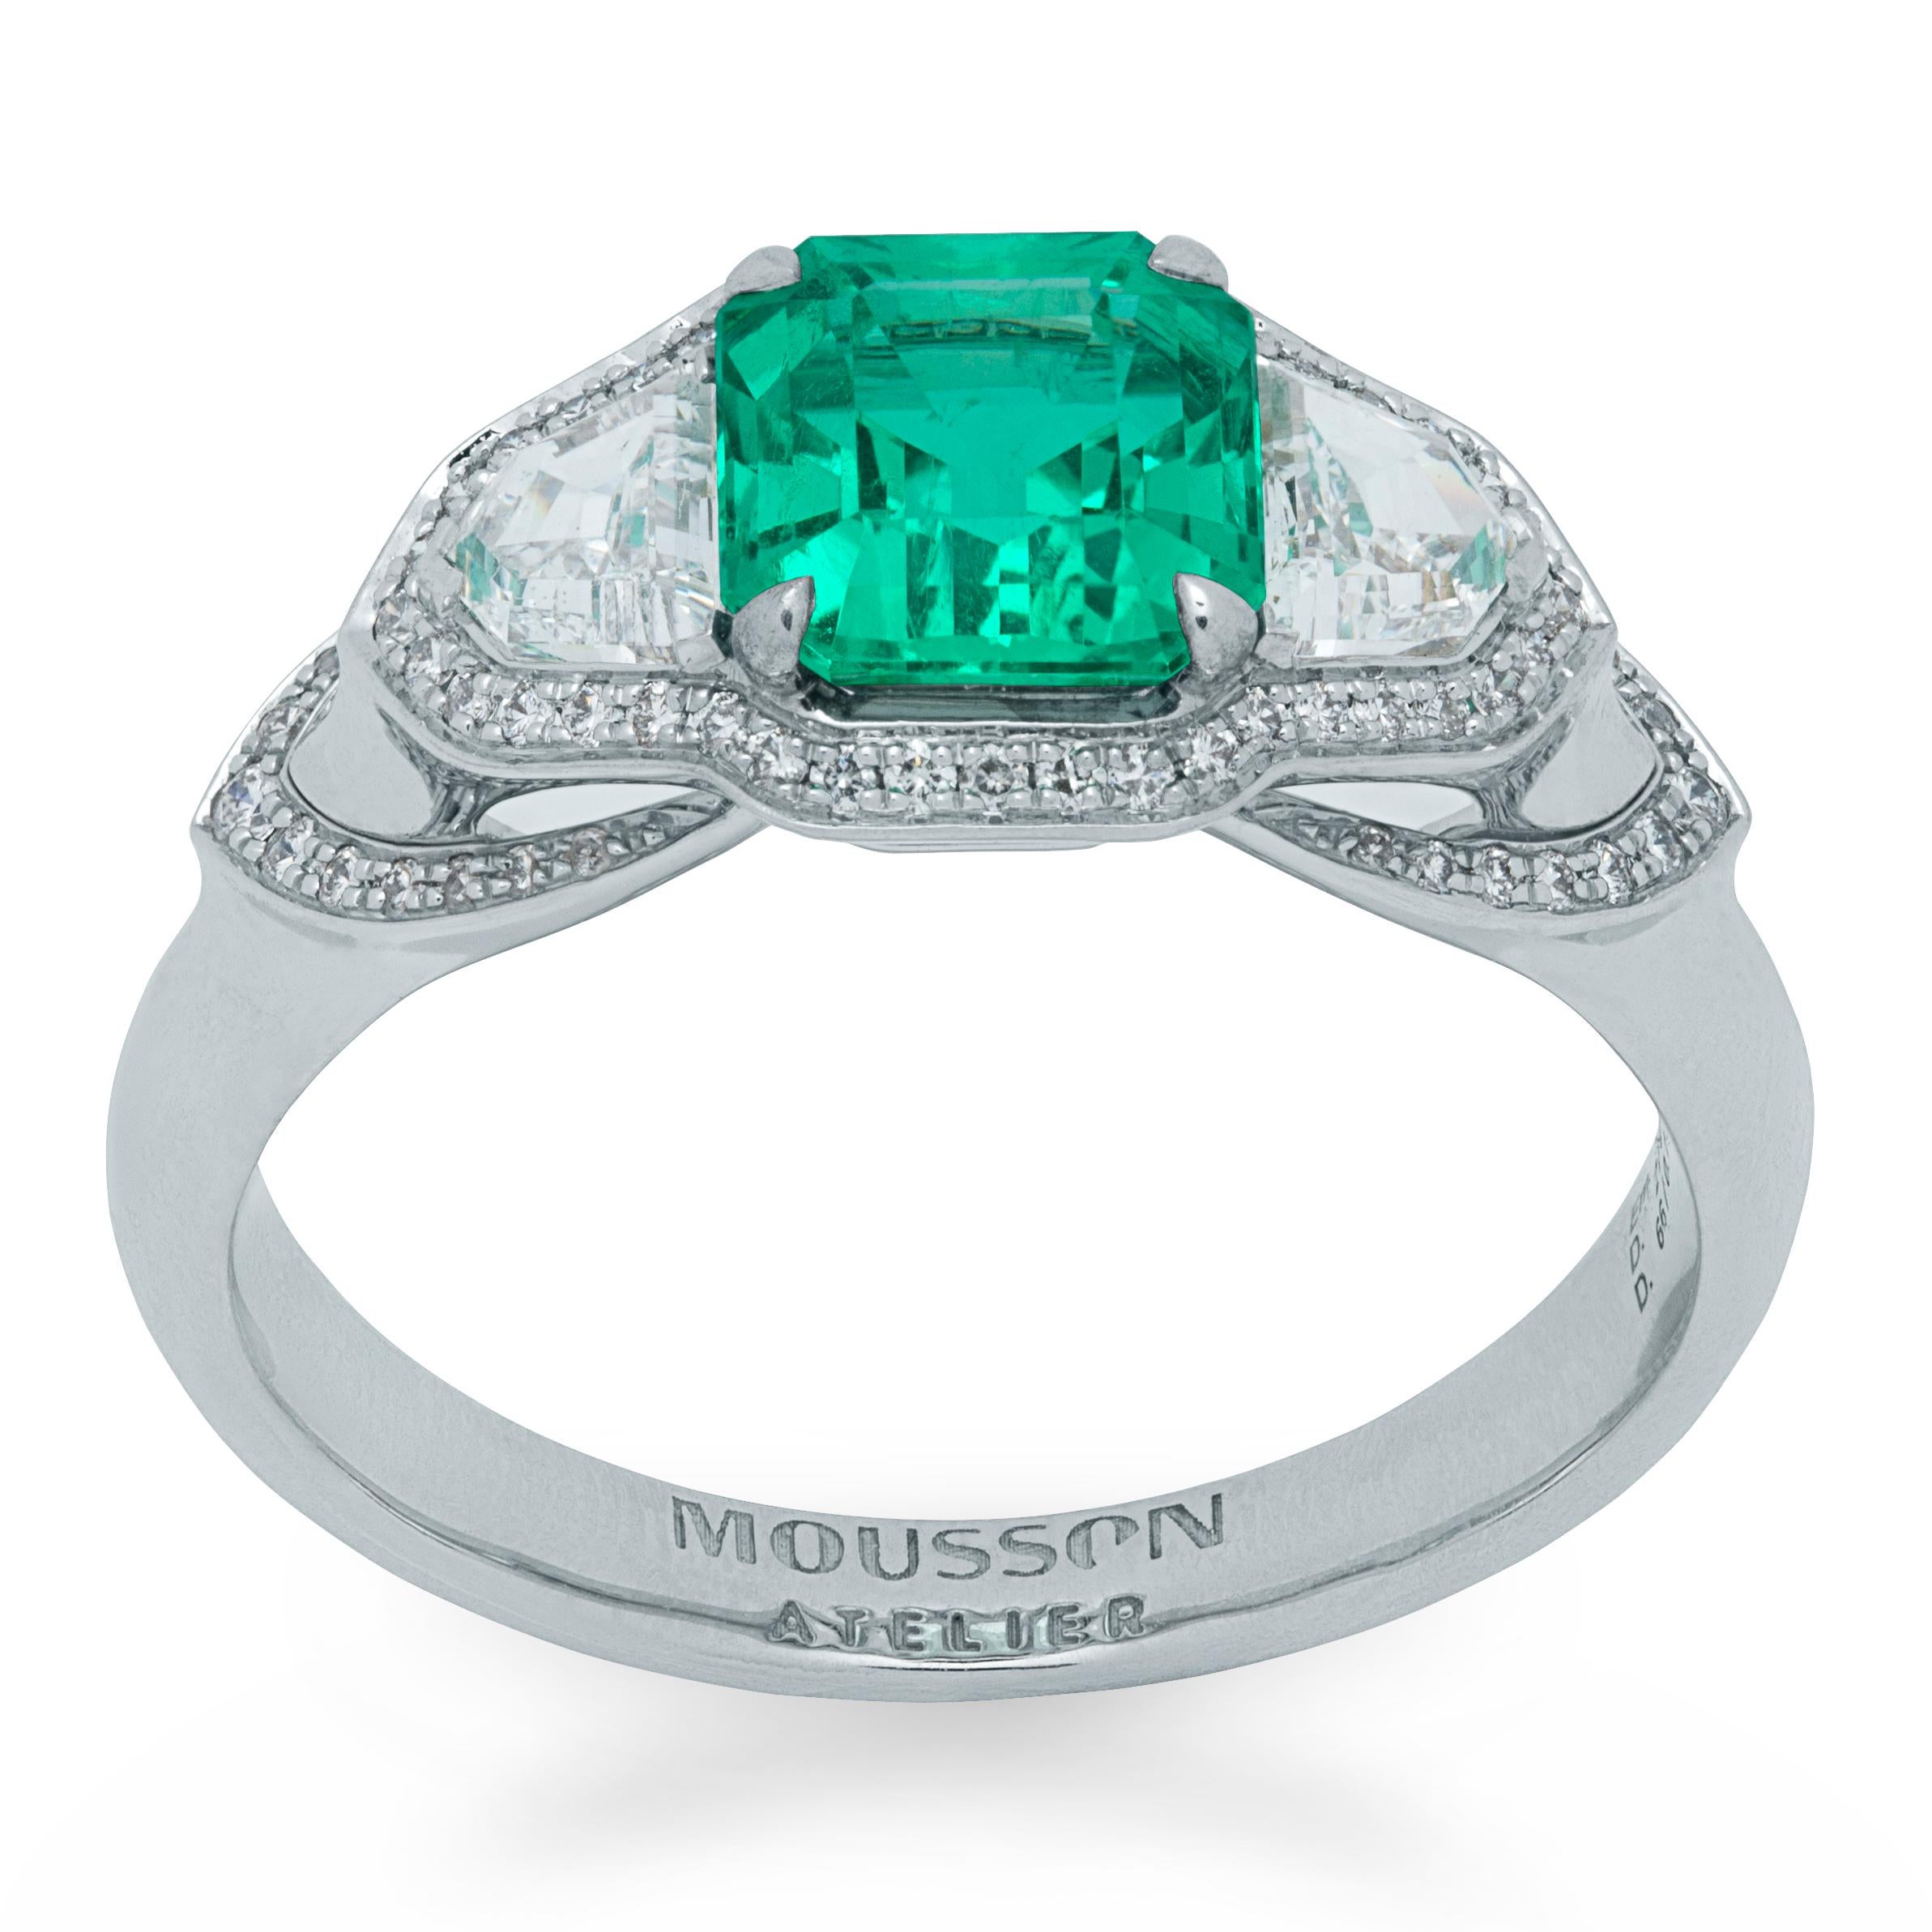 GRS Certified 1,39 Carat Columbian Emerald Diamond 18 Karat White Gold Ring

Classic is always in fashion! But if the classic is supplemented with something original,  bring there some zest, their own unique style, then it will sparkle with new